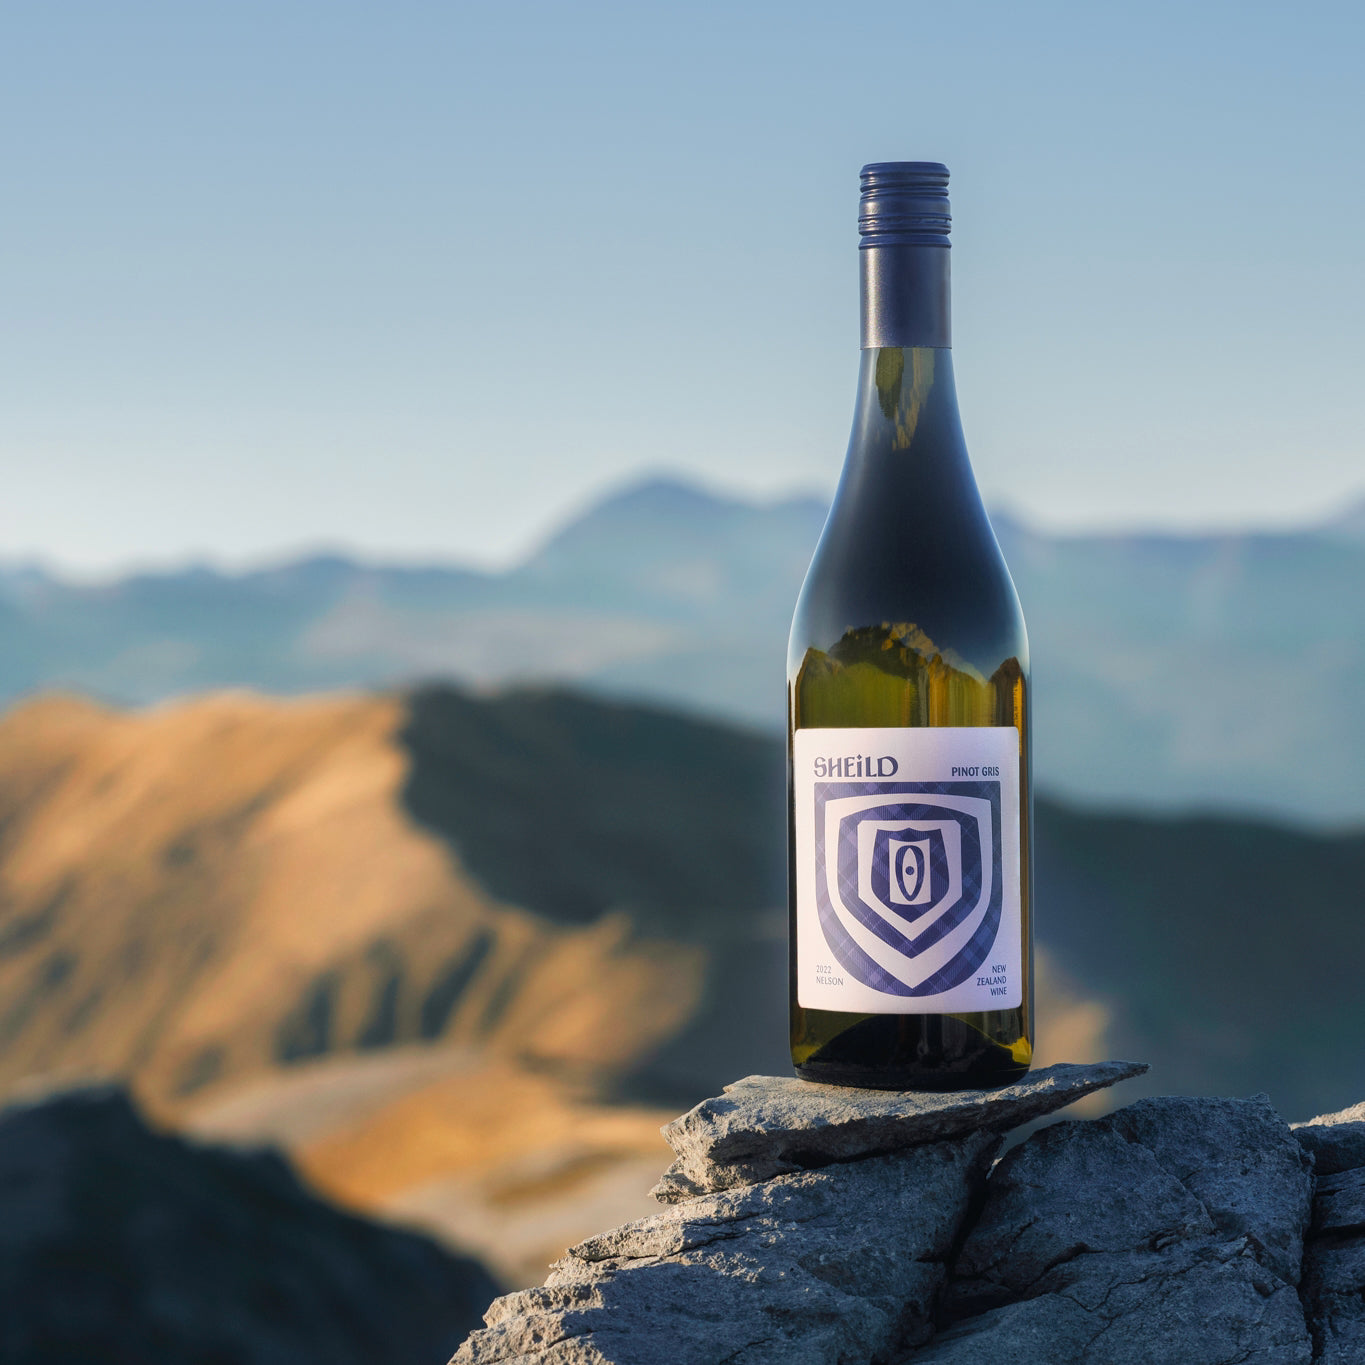 SHEiLD's Pinot Gris wine placed on a rock atop a mountain on a sunny day.